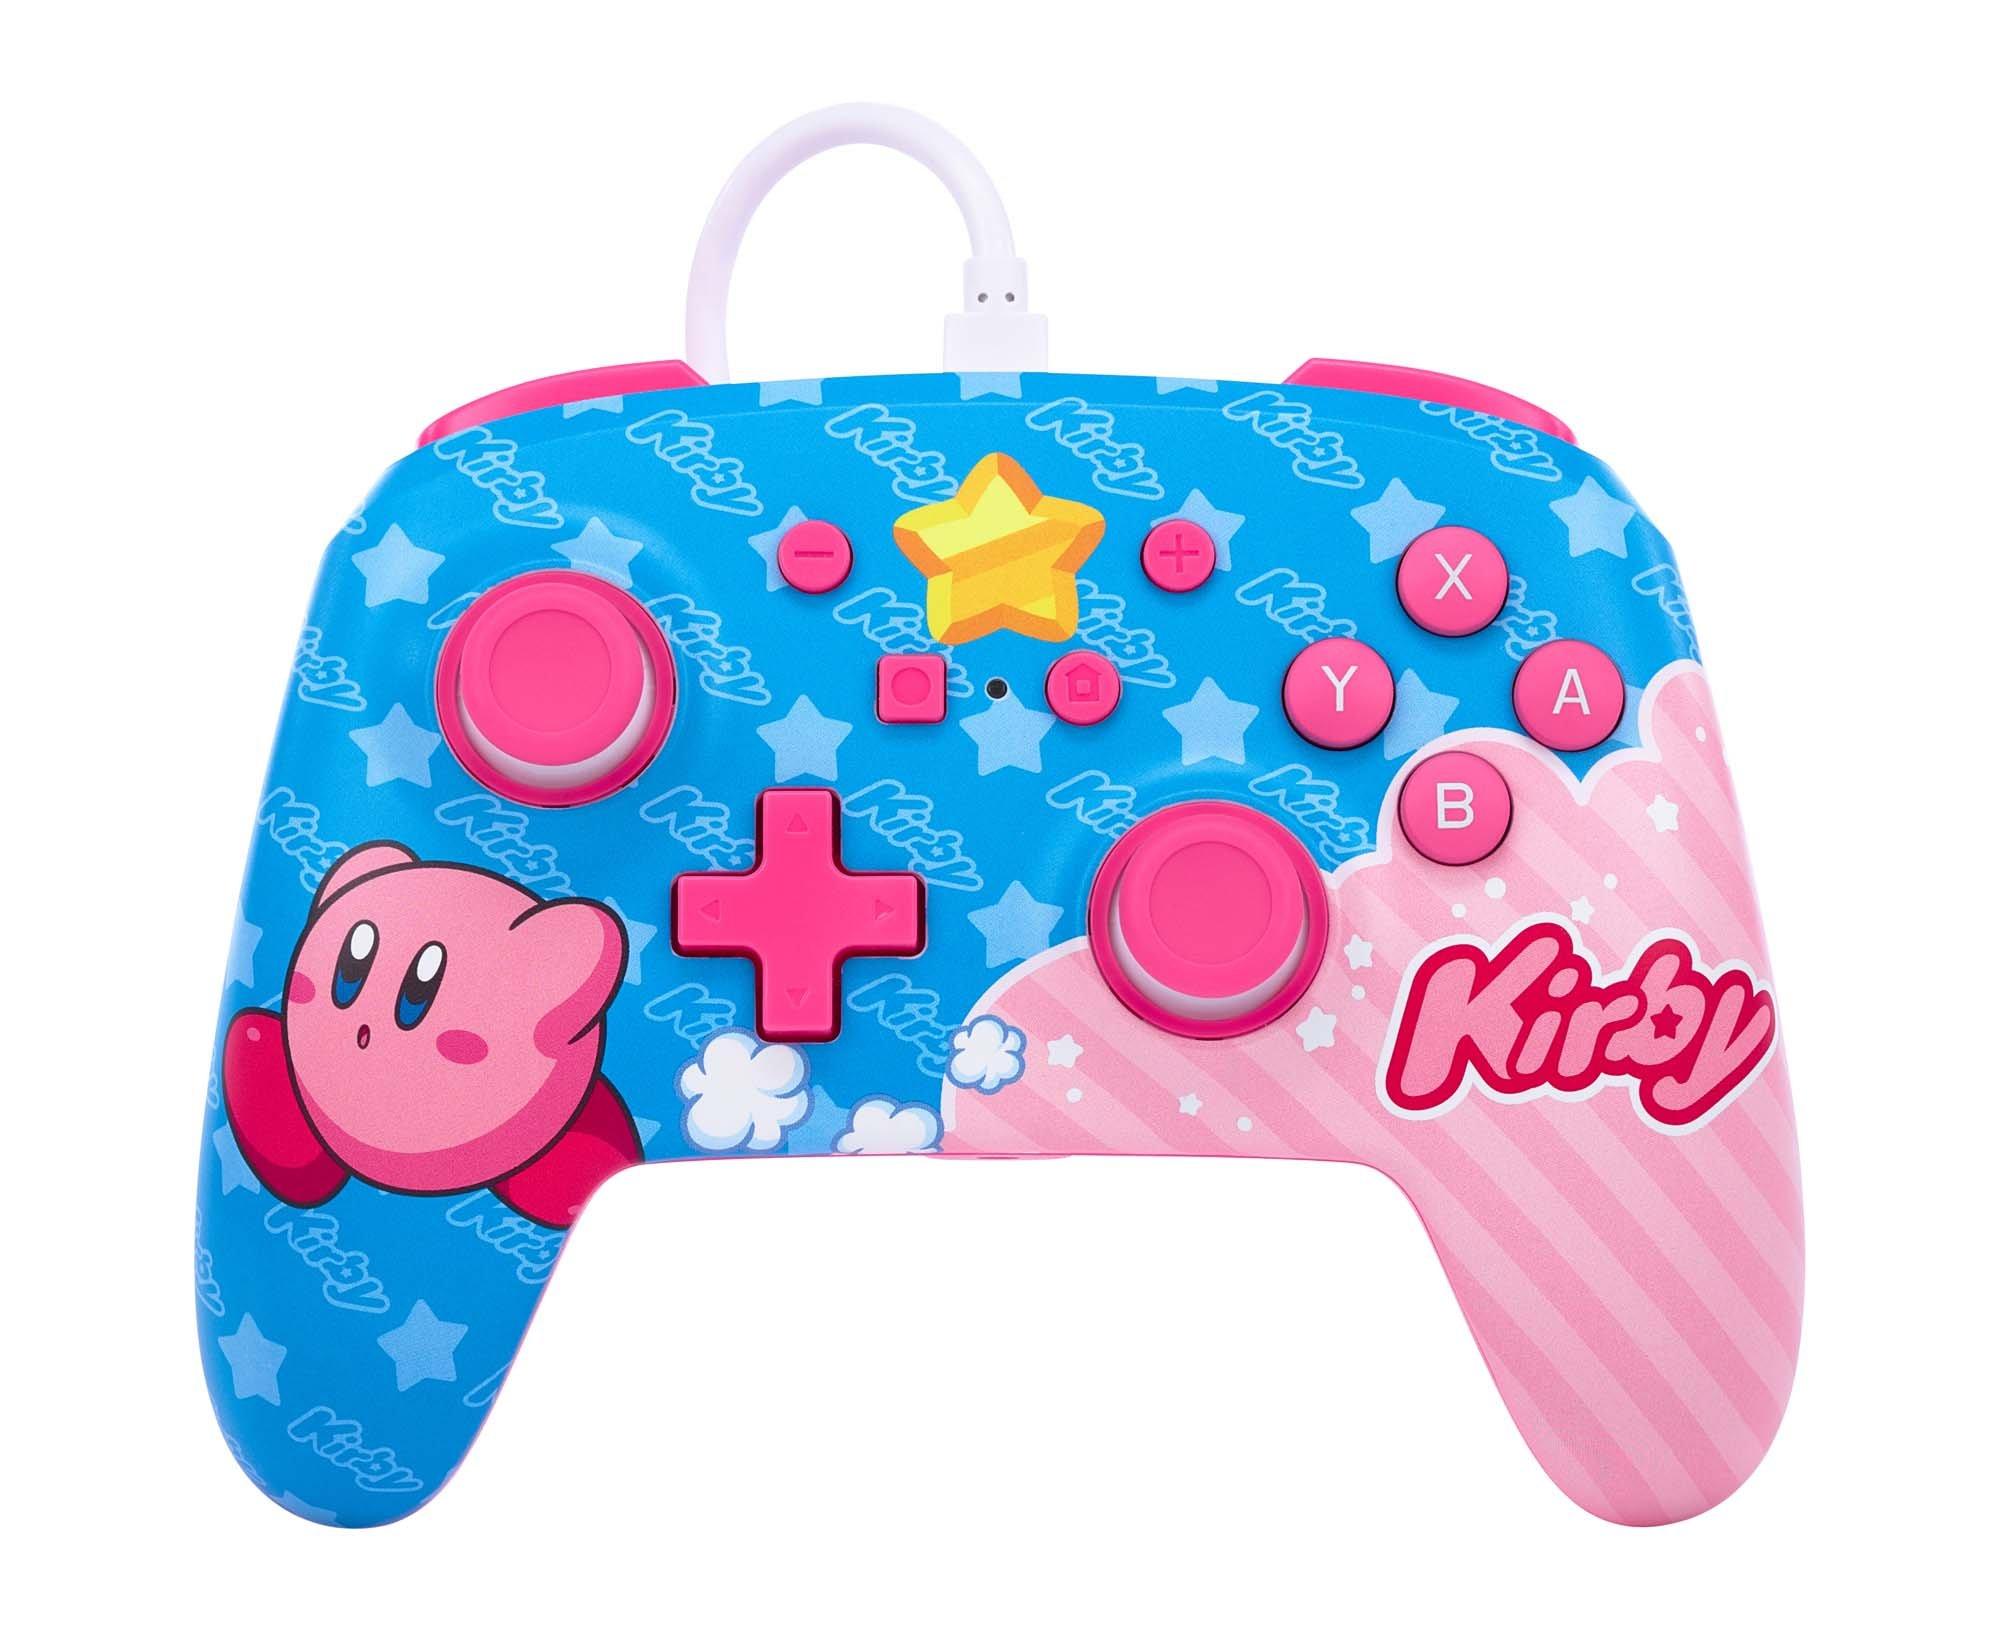 PowerA Controller for Switch - Kirby | GameStop